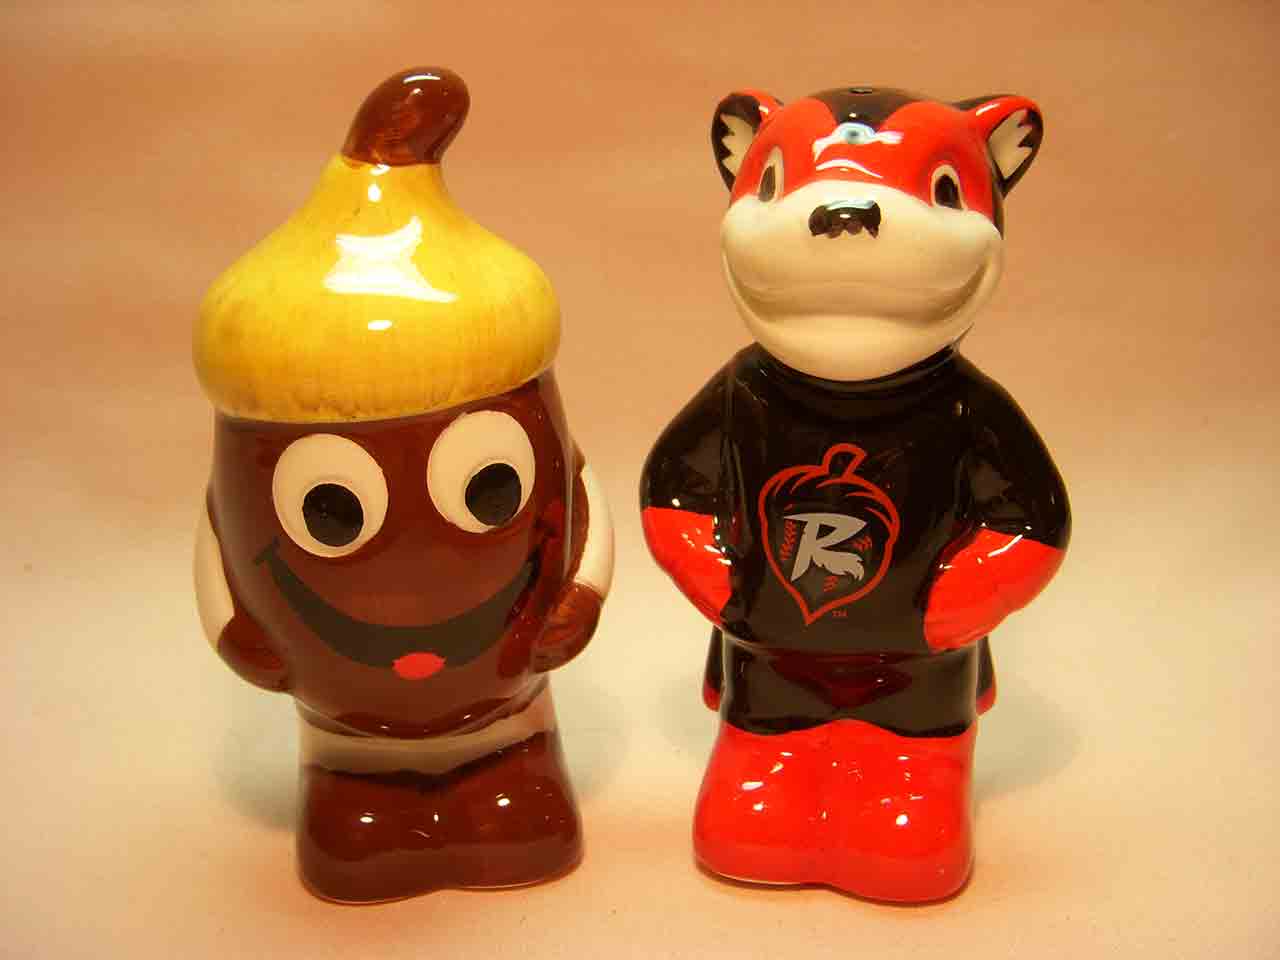 Richmond Flying Squirrels mascot Nutzy and Zinger salt and pepper shakers